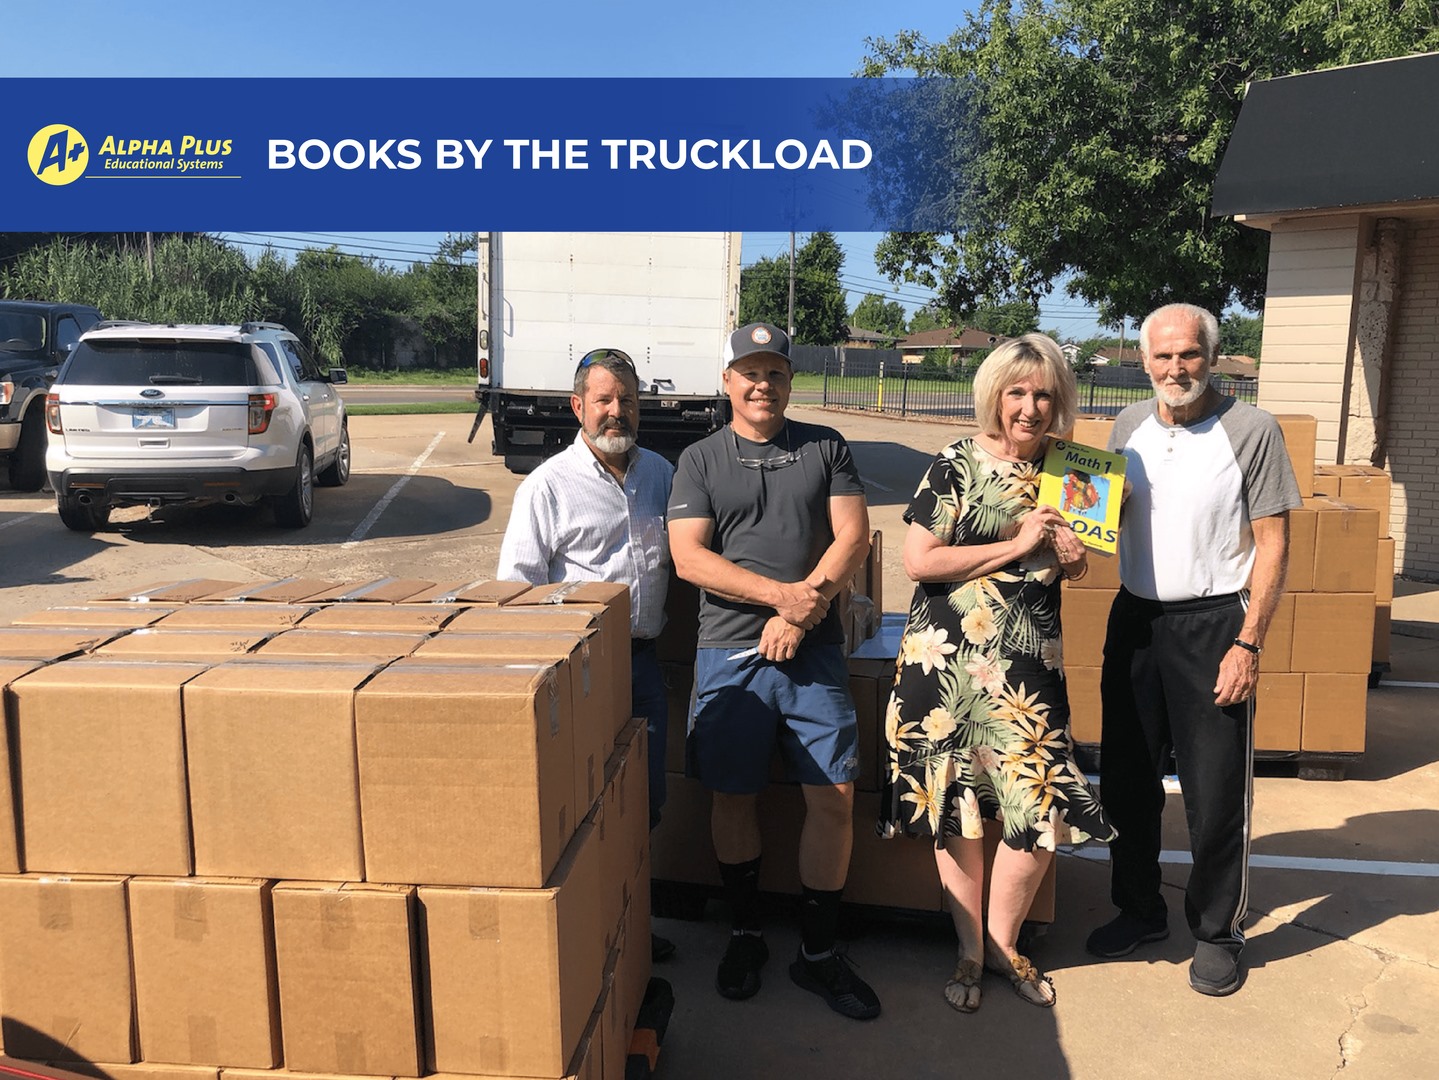 A Plus Books by the truckload